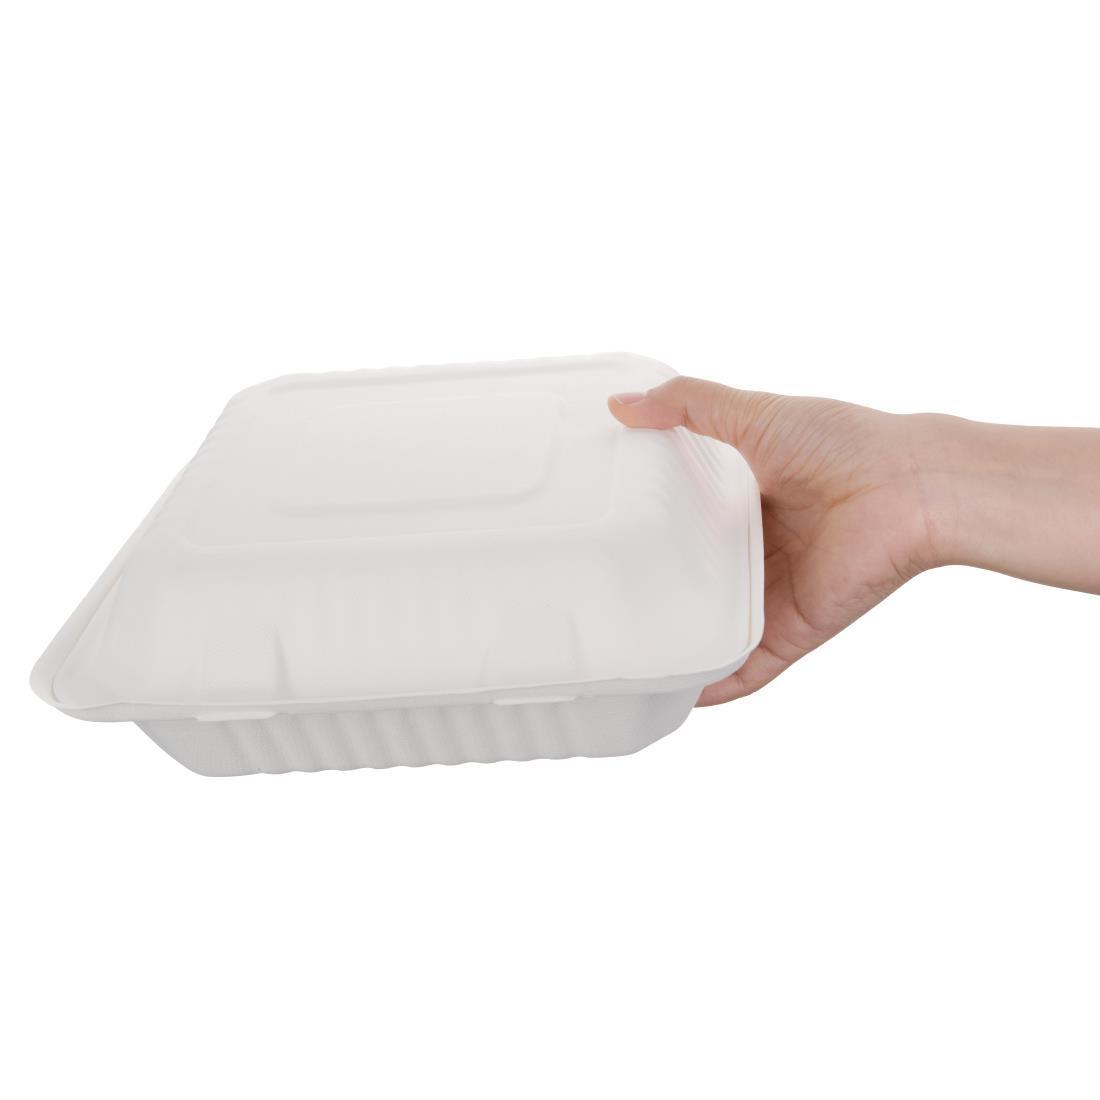 Fiesta Compostable Bagasse Hinged Food Containers 236mm (Pack of 200) - FC527  - 6